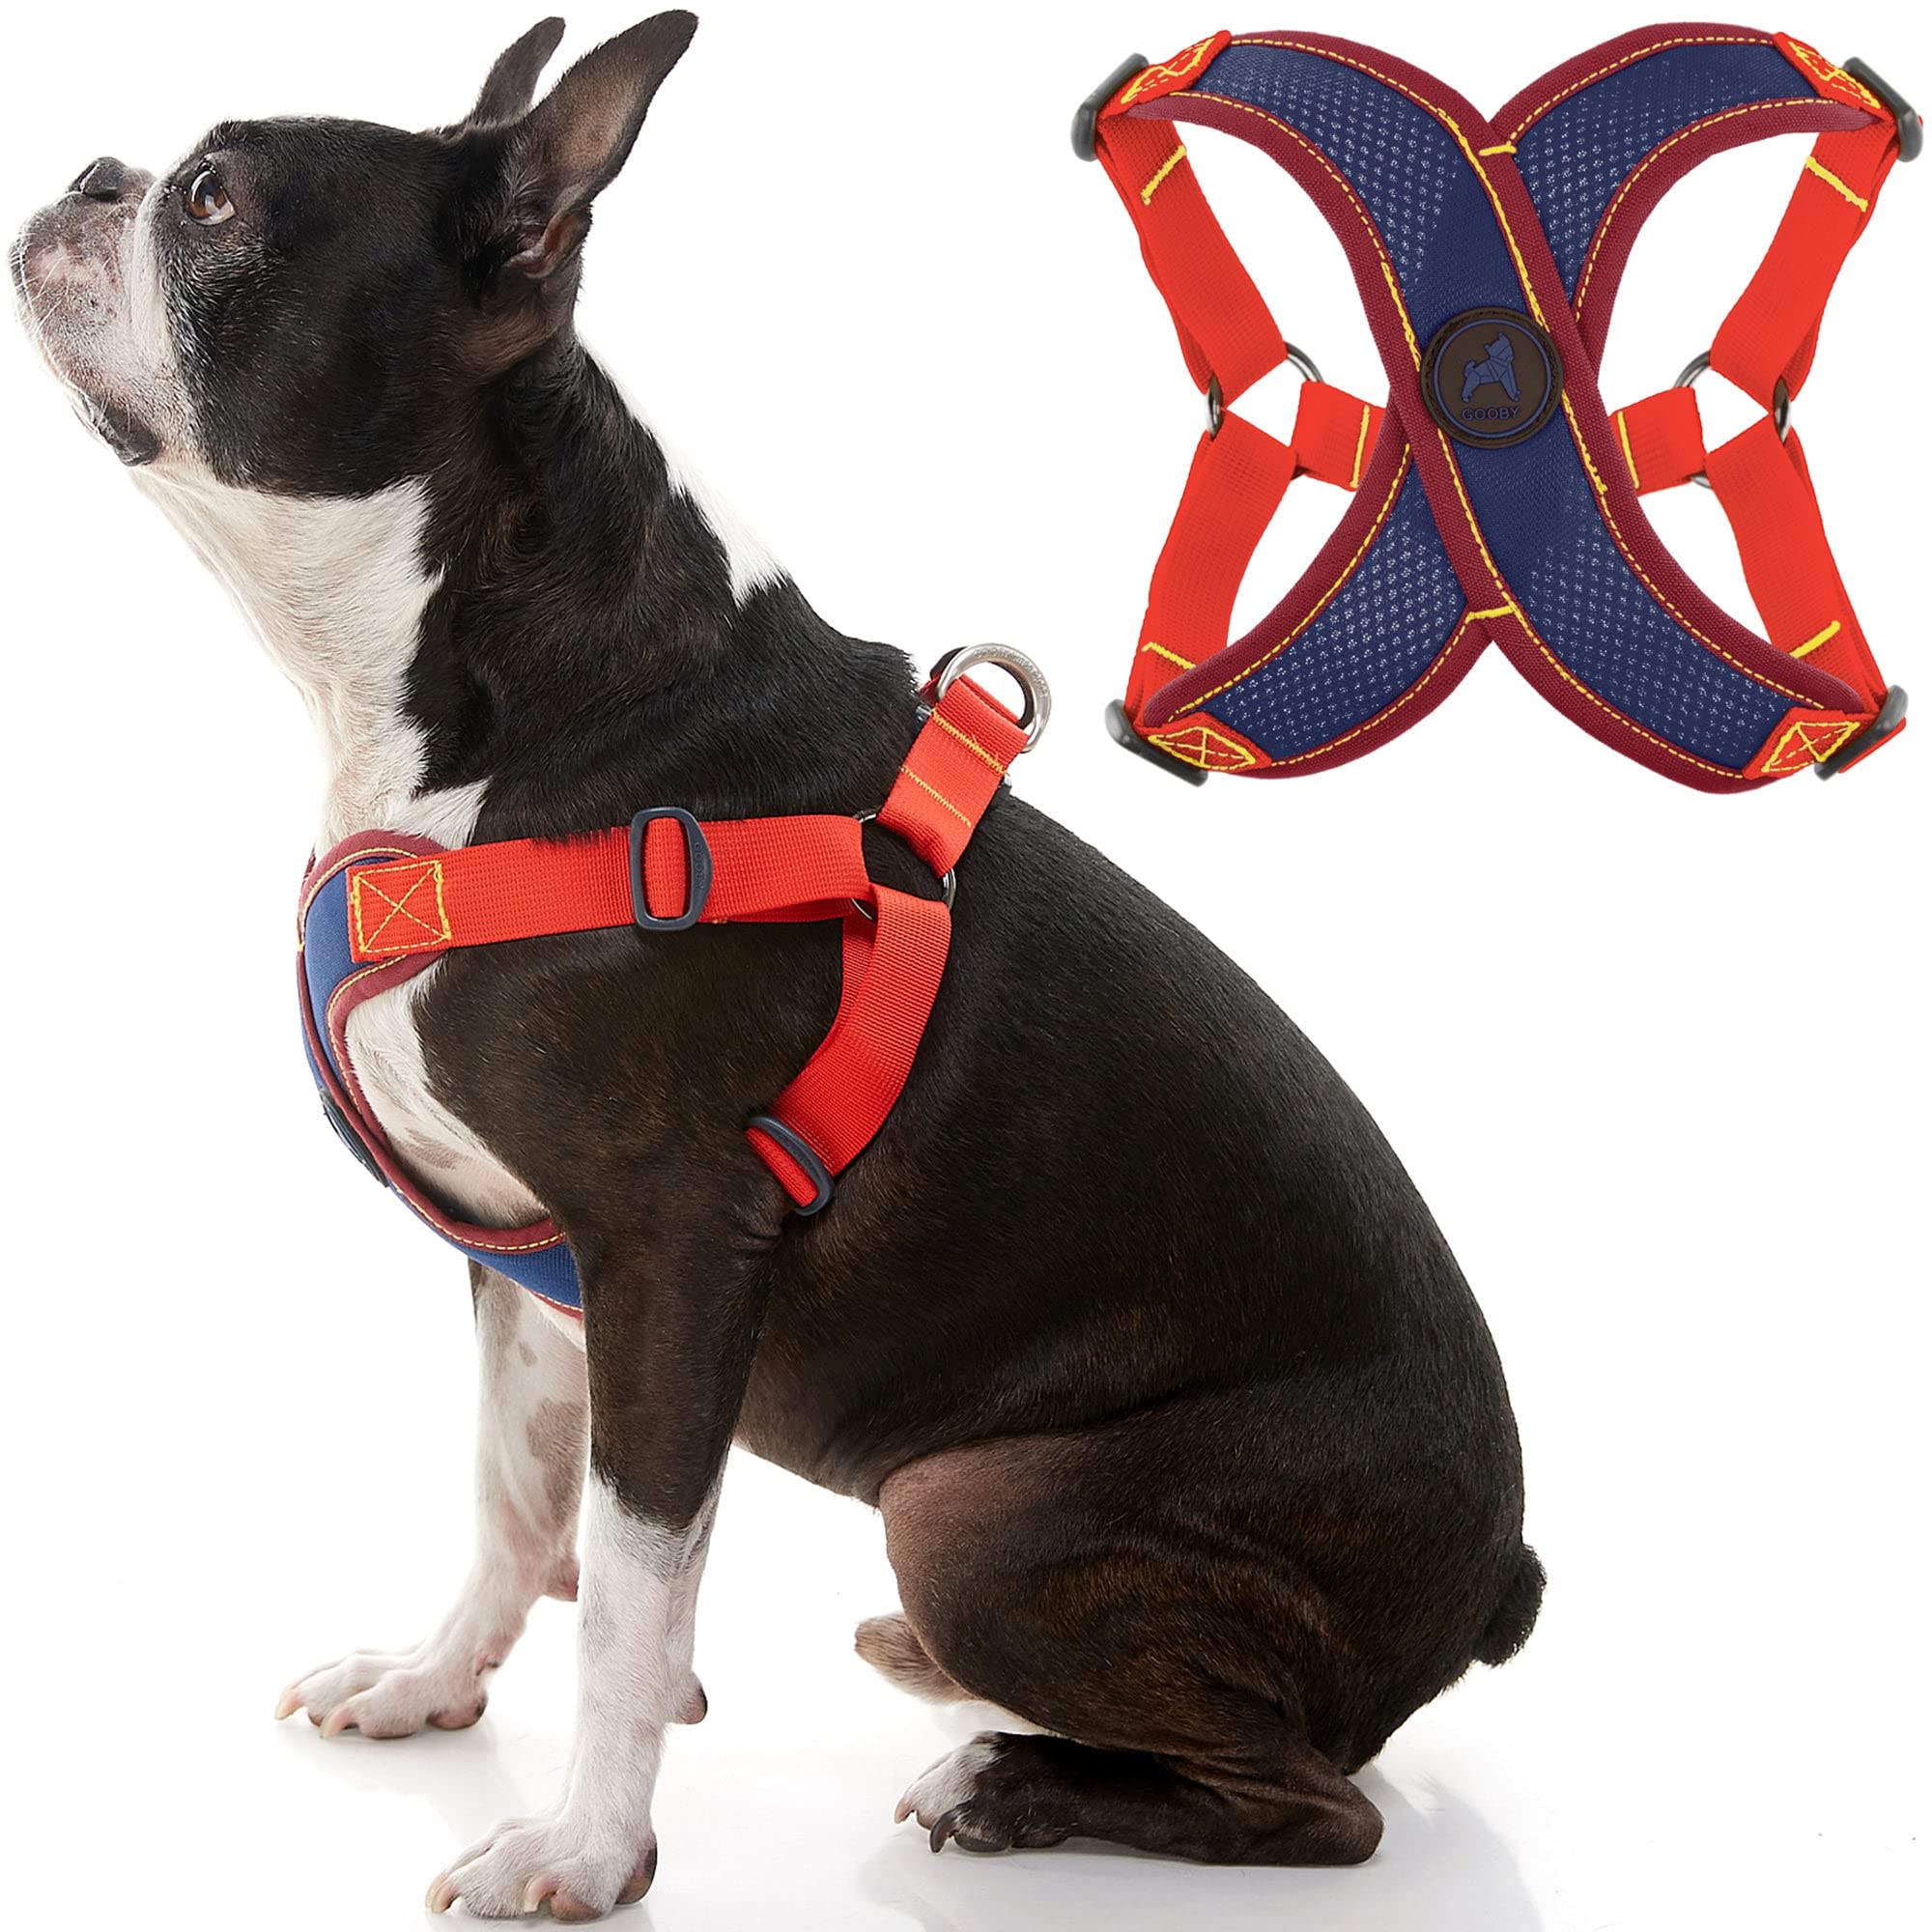 gooby comfort X Step in Harness V2 - Large Navy(Red) - No Pull Small Dog Harness with Patented Adjusting choke-Free X Frame - Pe